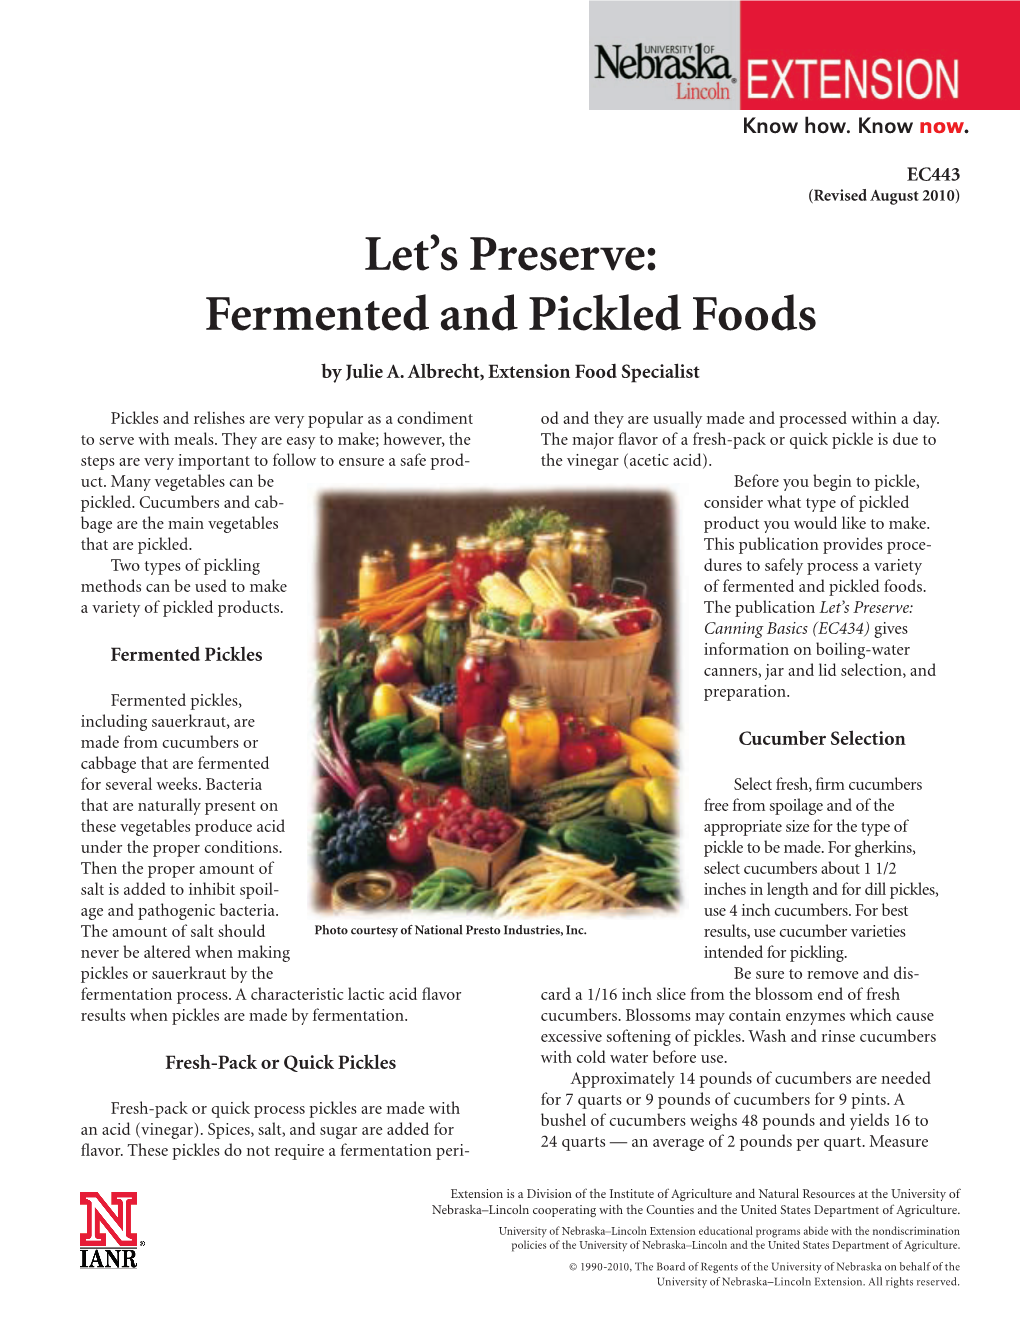 Fermented and Pickled Foods